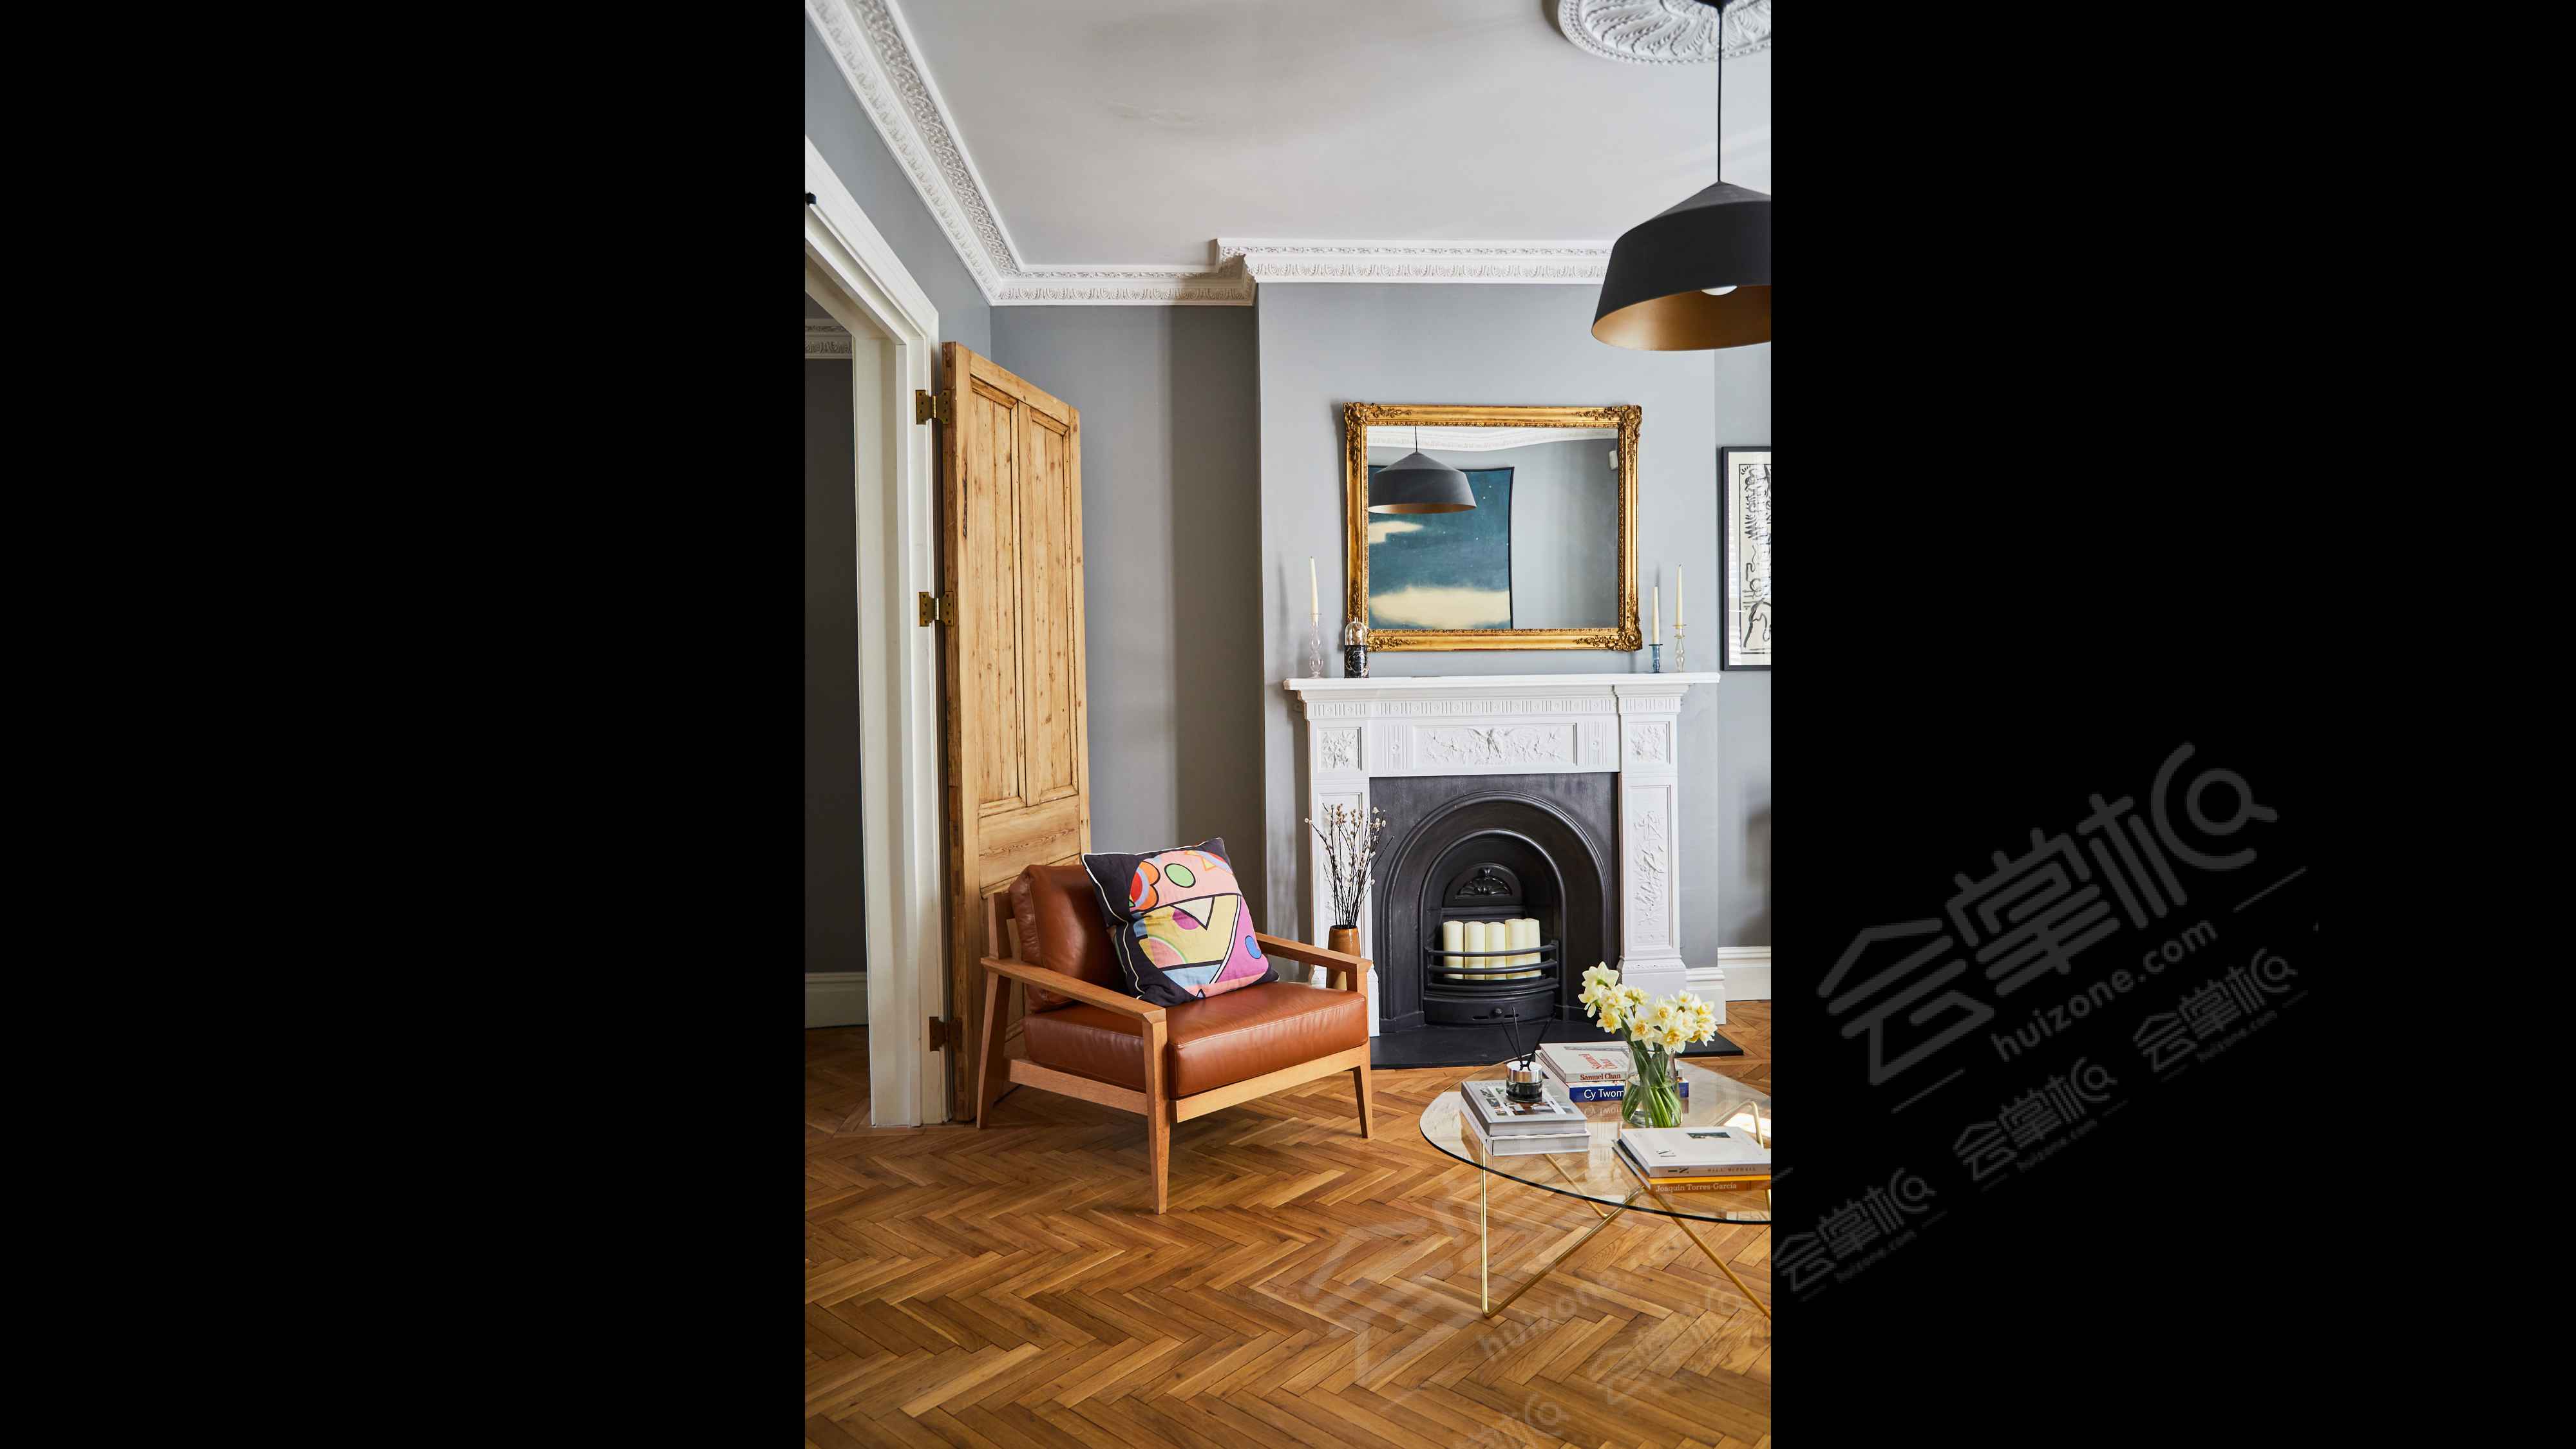 Large and light interior designed period property (house) in Brixton